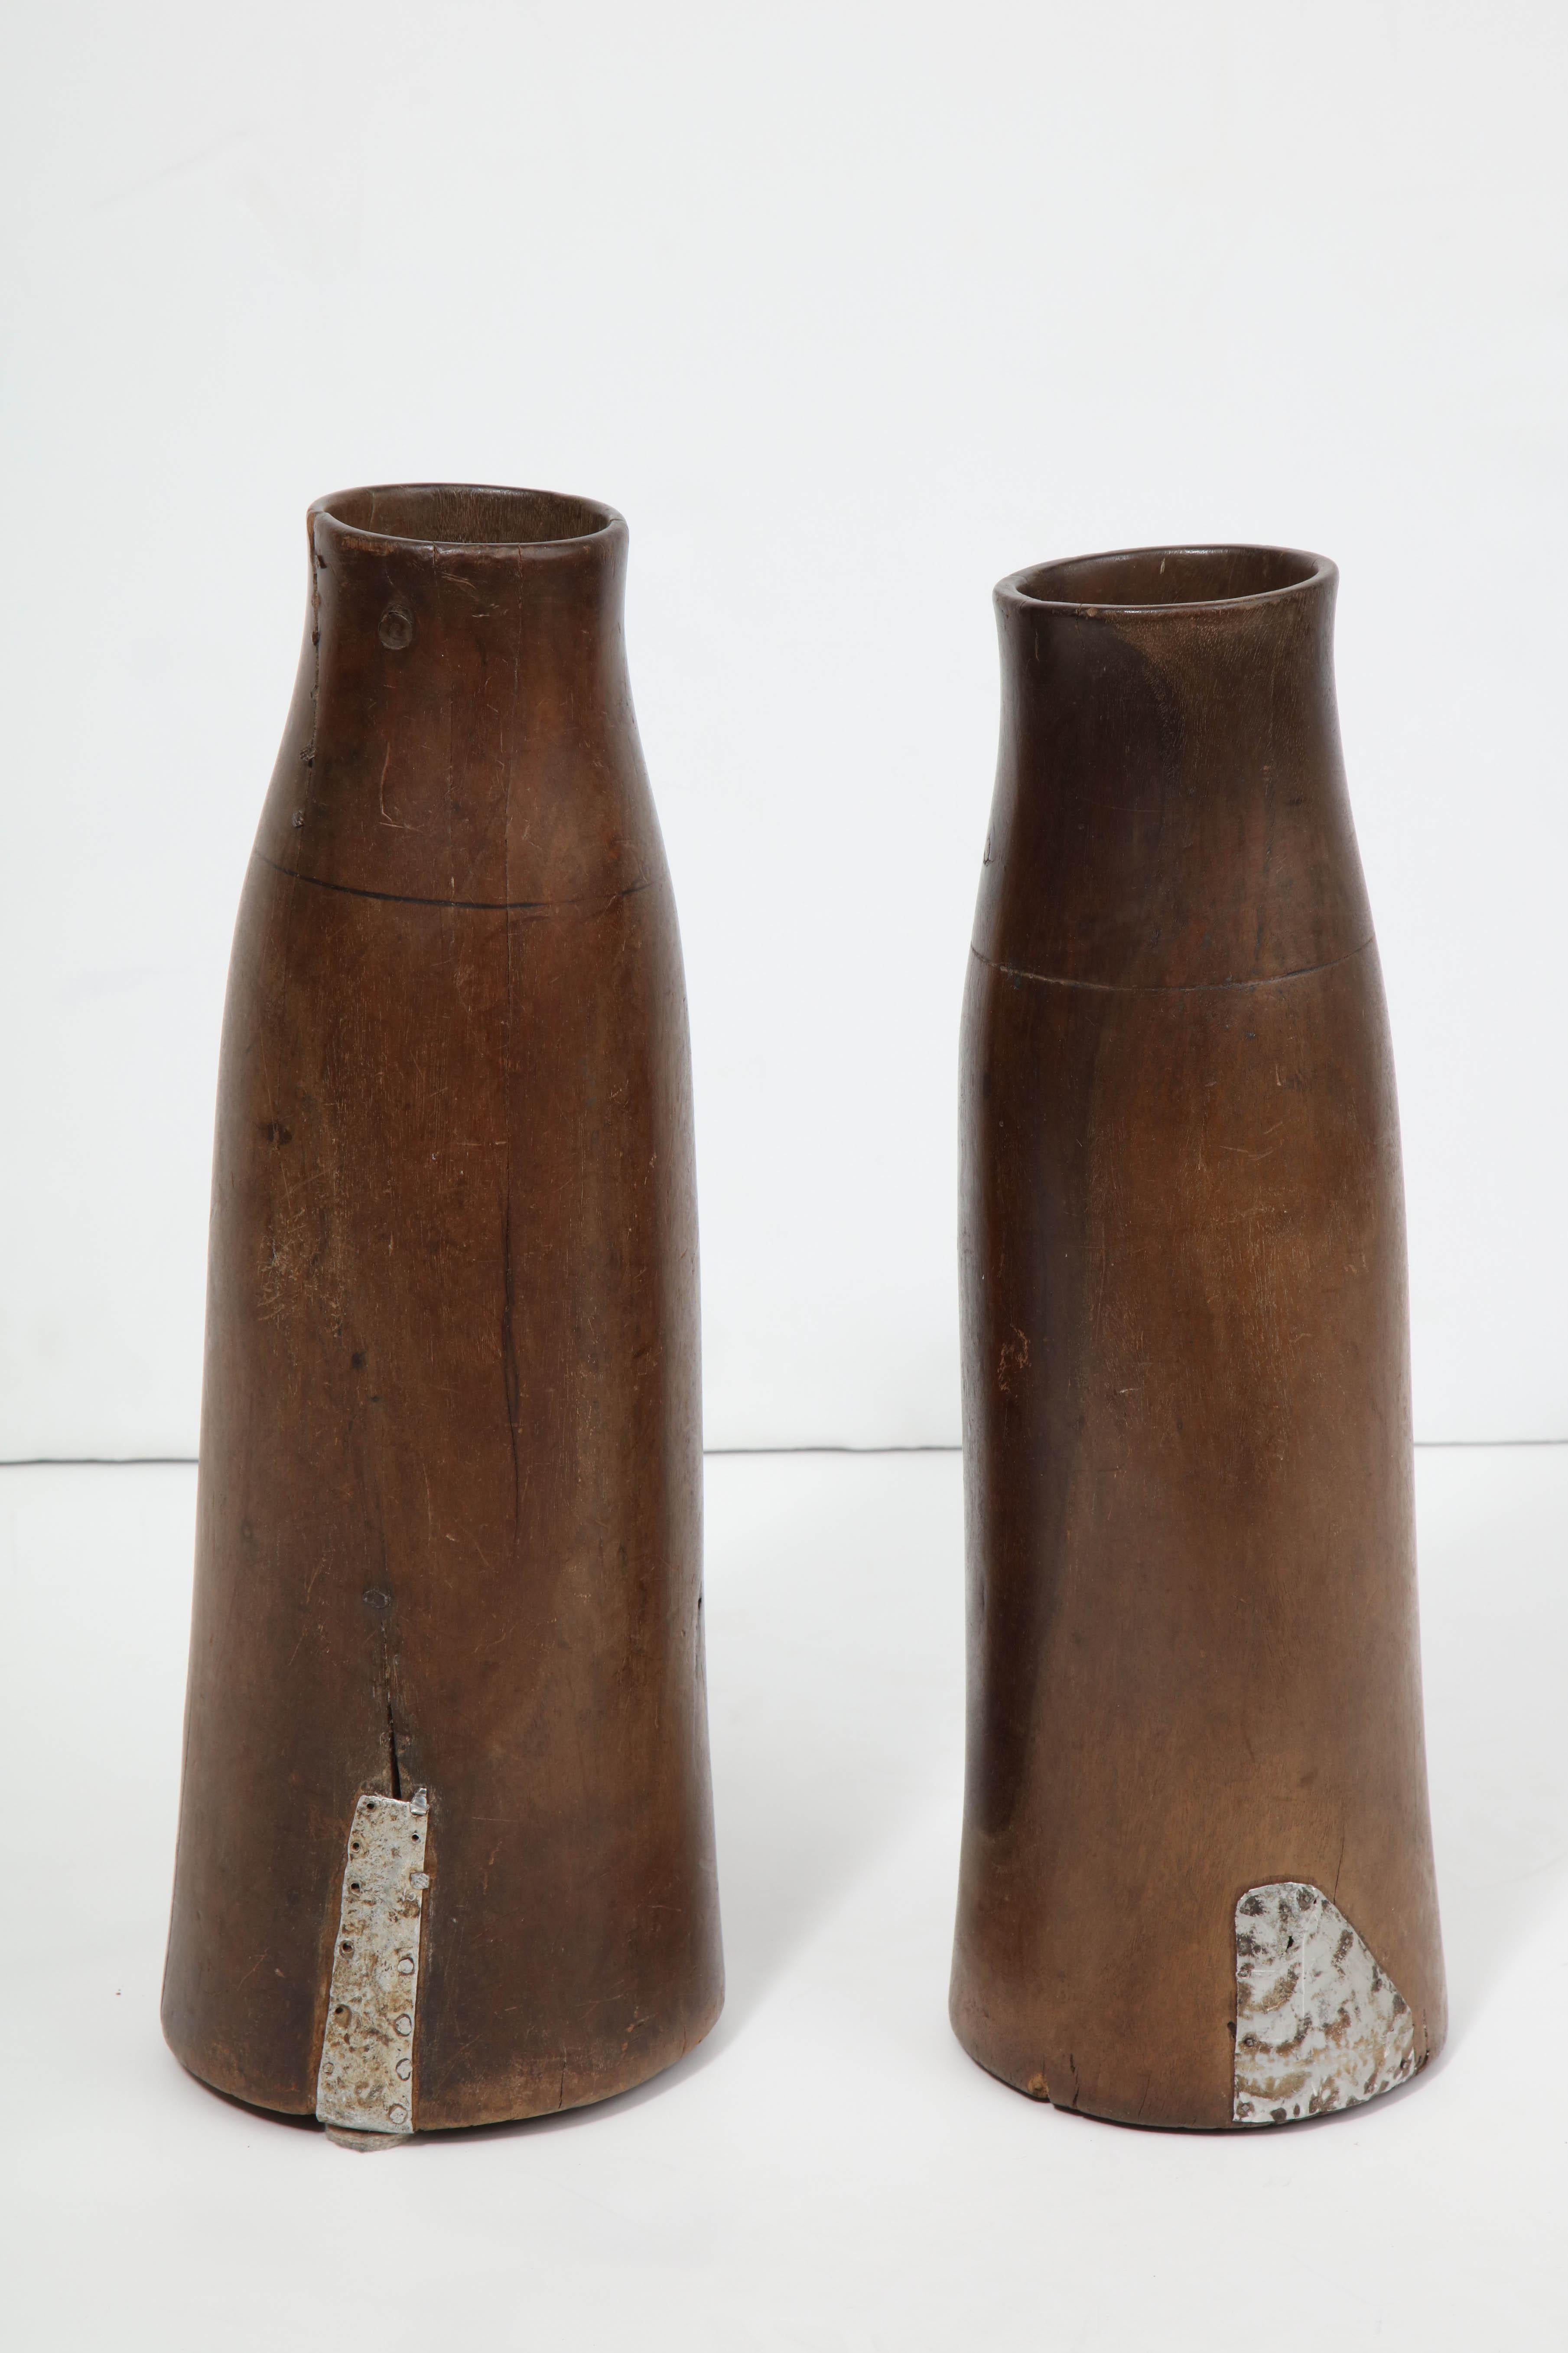 Hand-carved tall wooden milk holders with metal inserts.